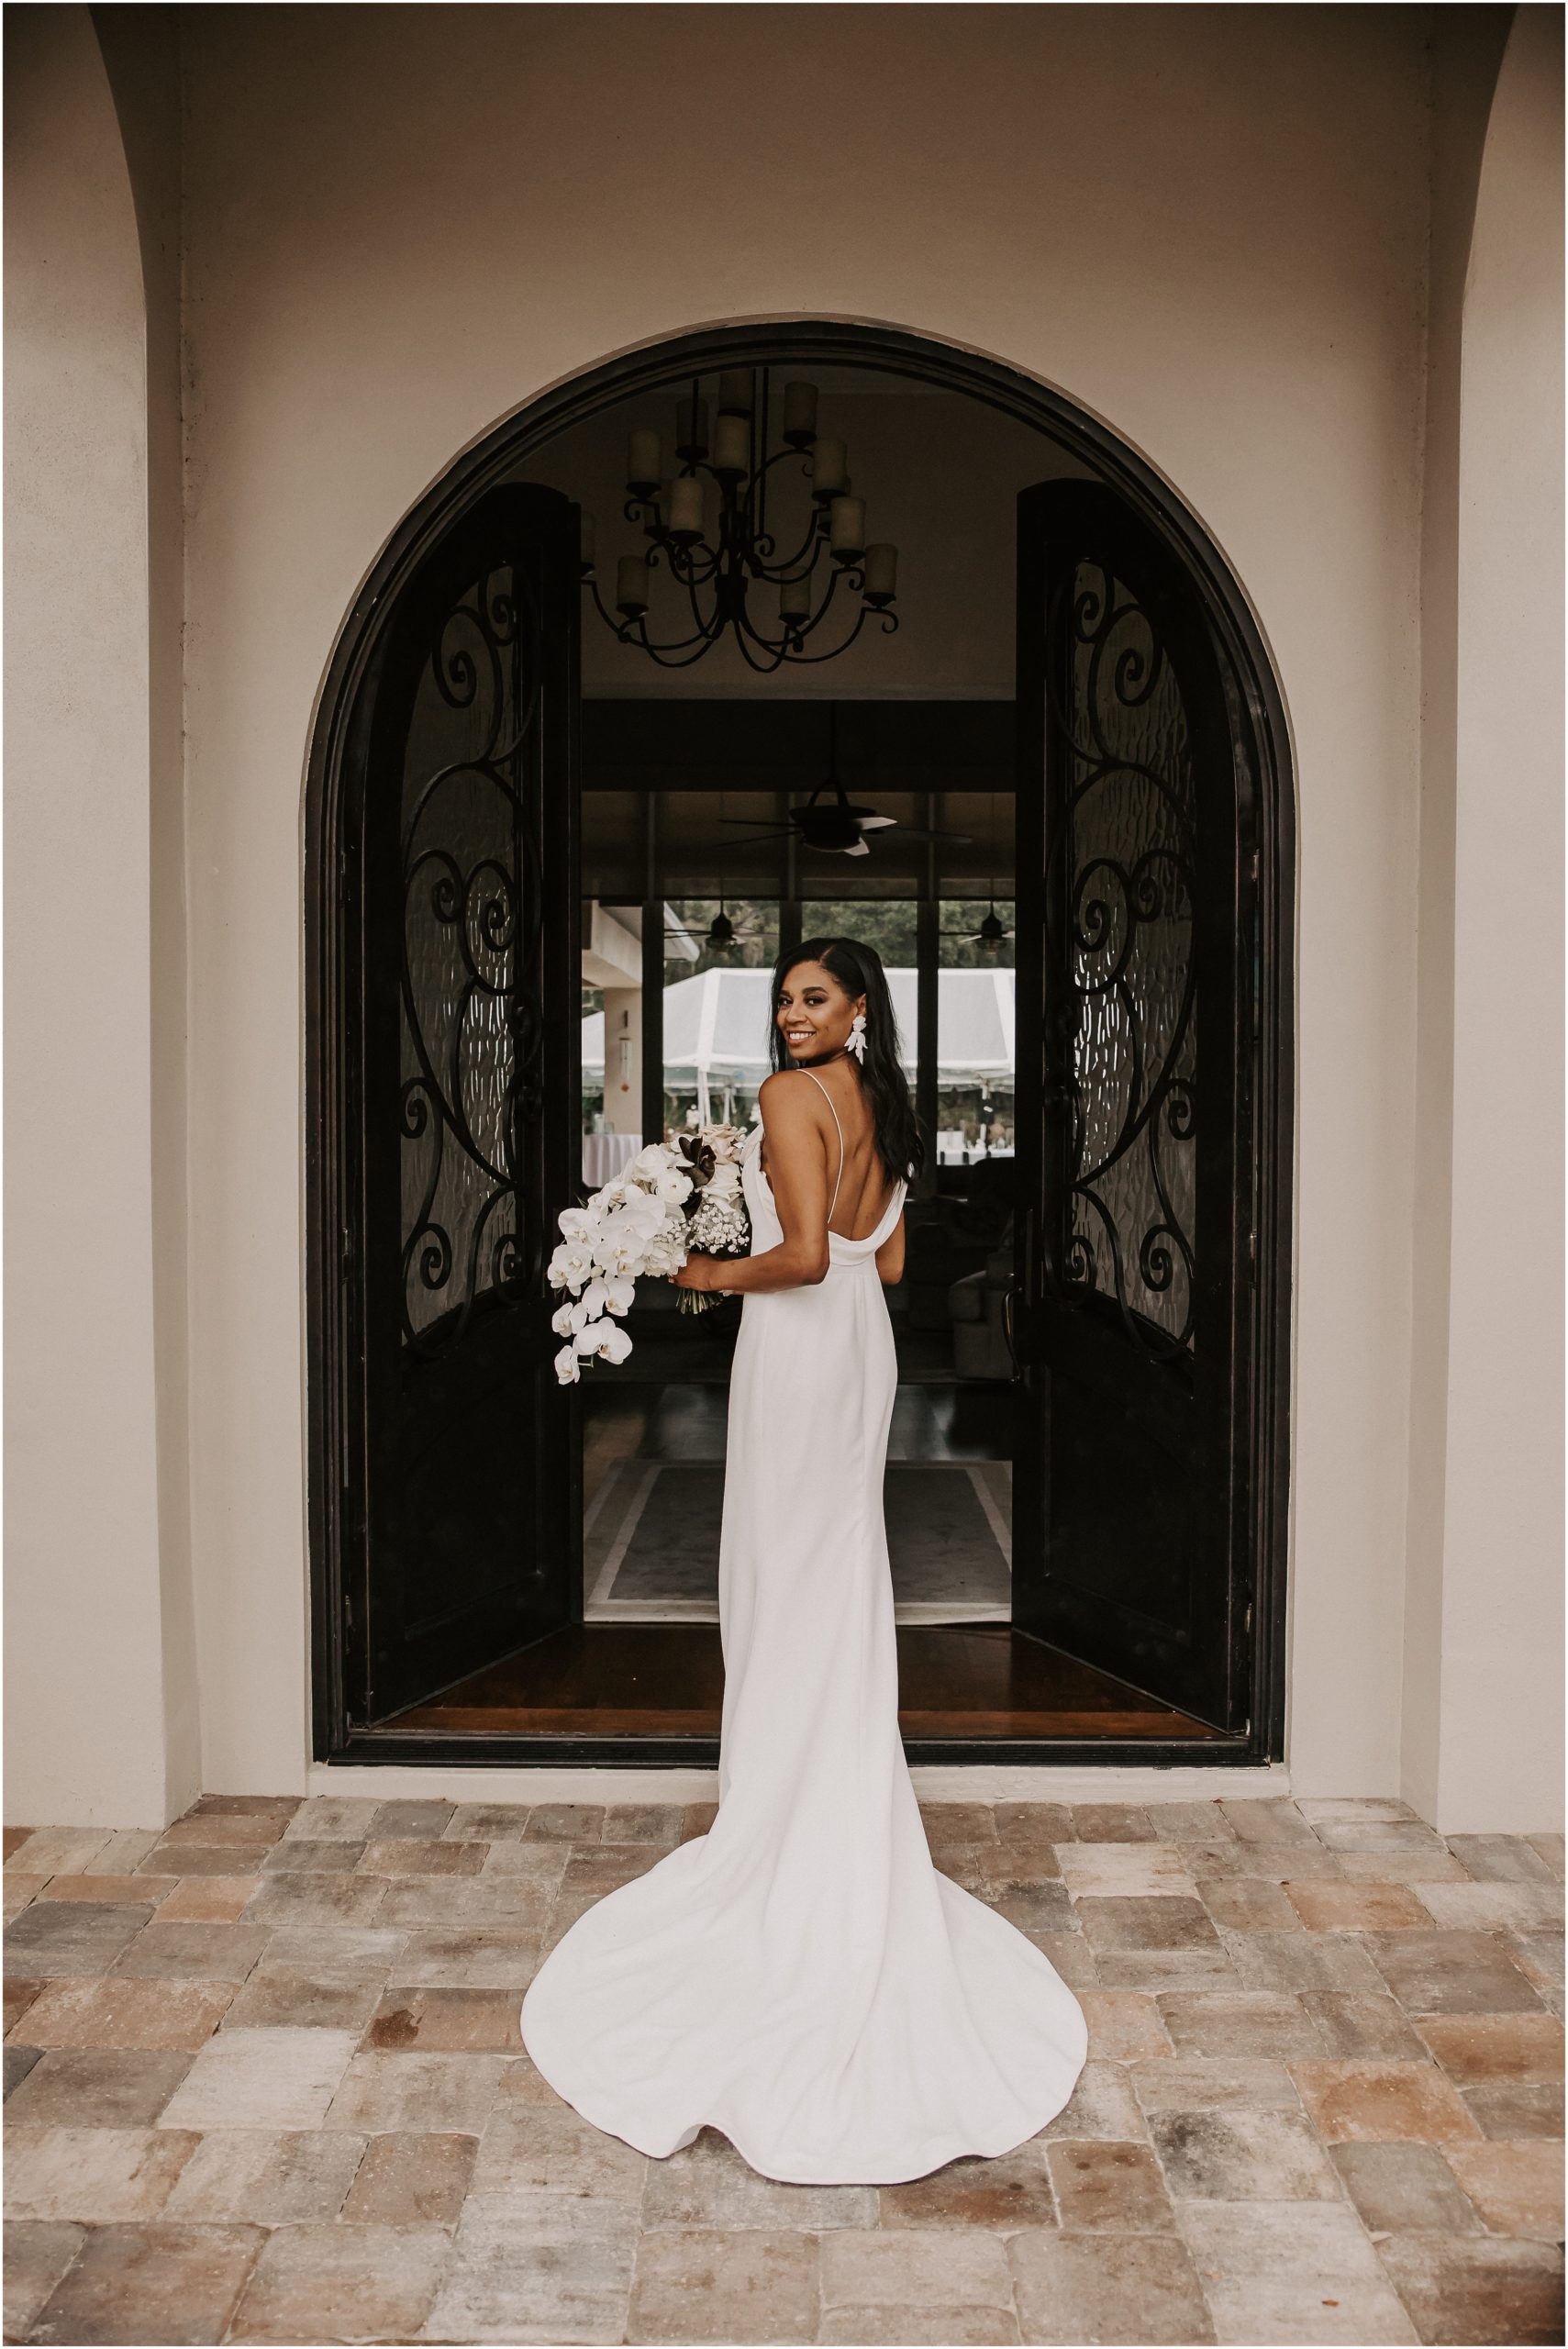 Bride Colby found her dream wedding dress at Love Bridal Boutique. As a result, the deep neckline on the back and the form-fitted silhouette were paired perfectly with her dreamy bouquet.